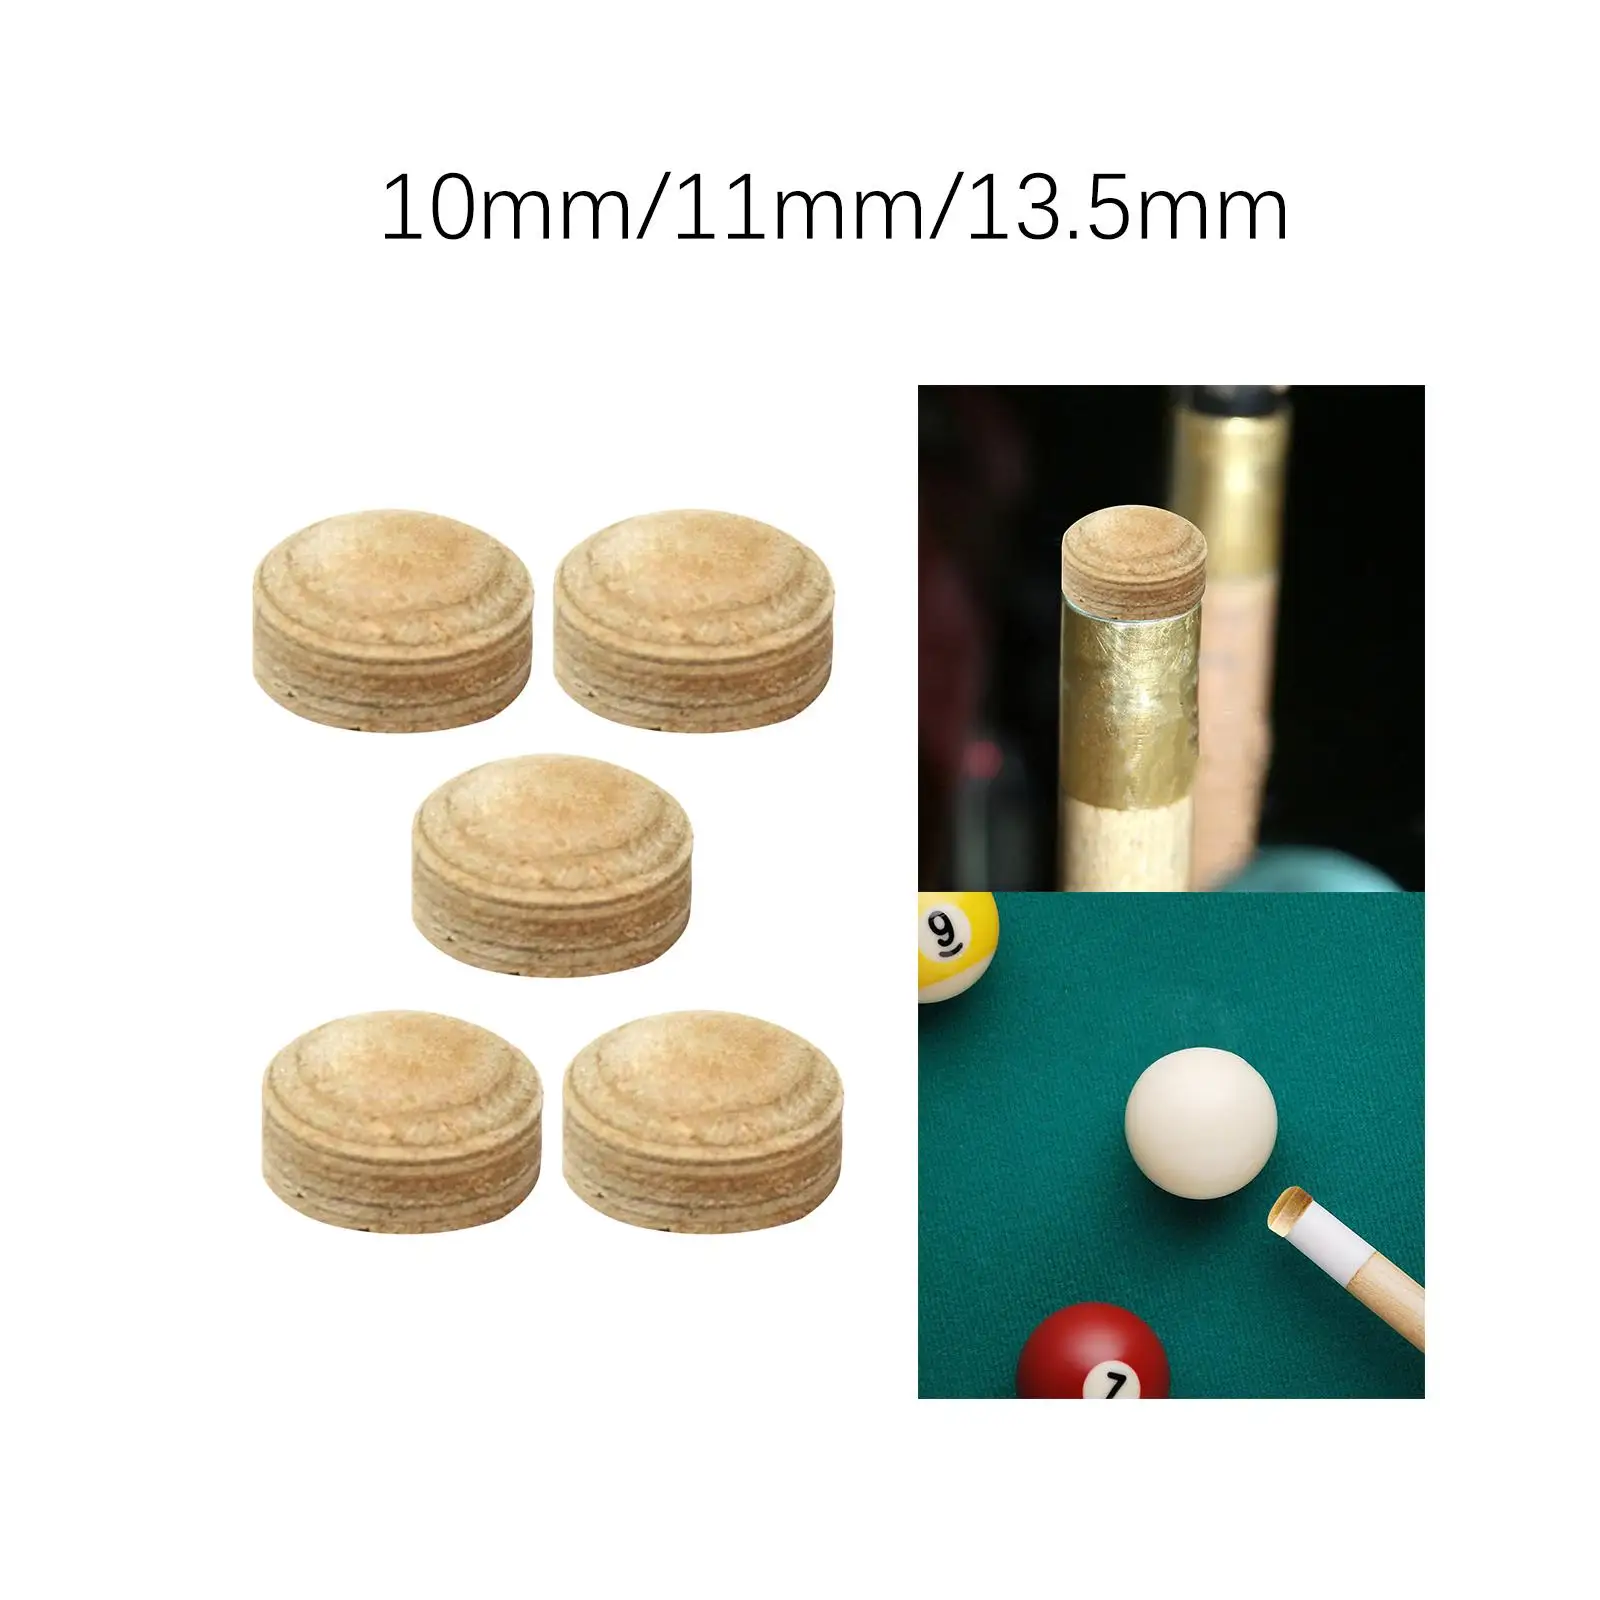 5Pcs Billiard Cue Tips Accessories Multiple Layer Repair Kit End Tips for Club Billiards Room Home Personal Use Billiard Players